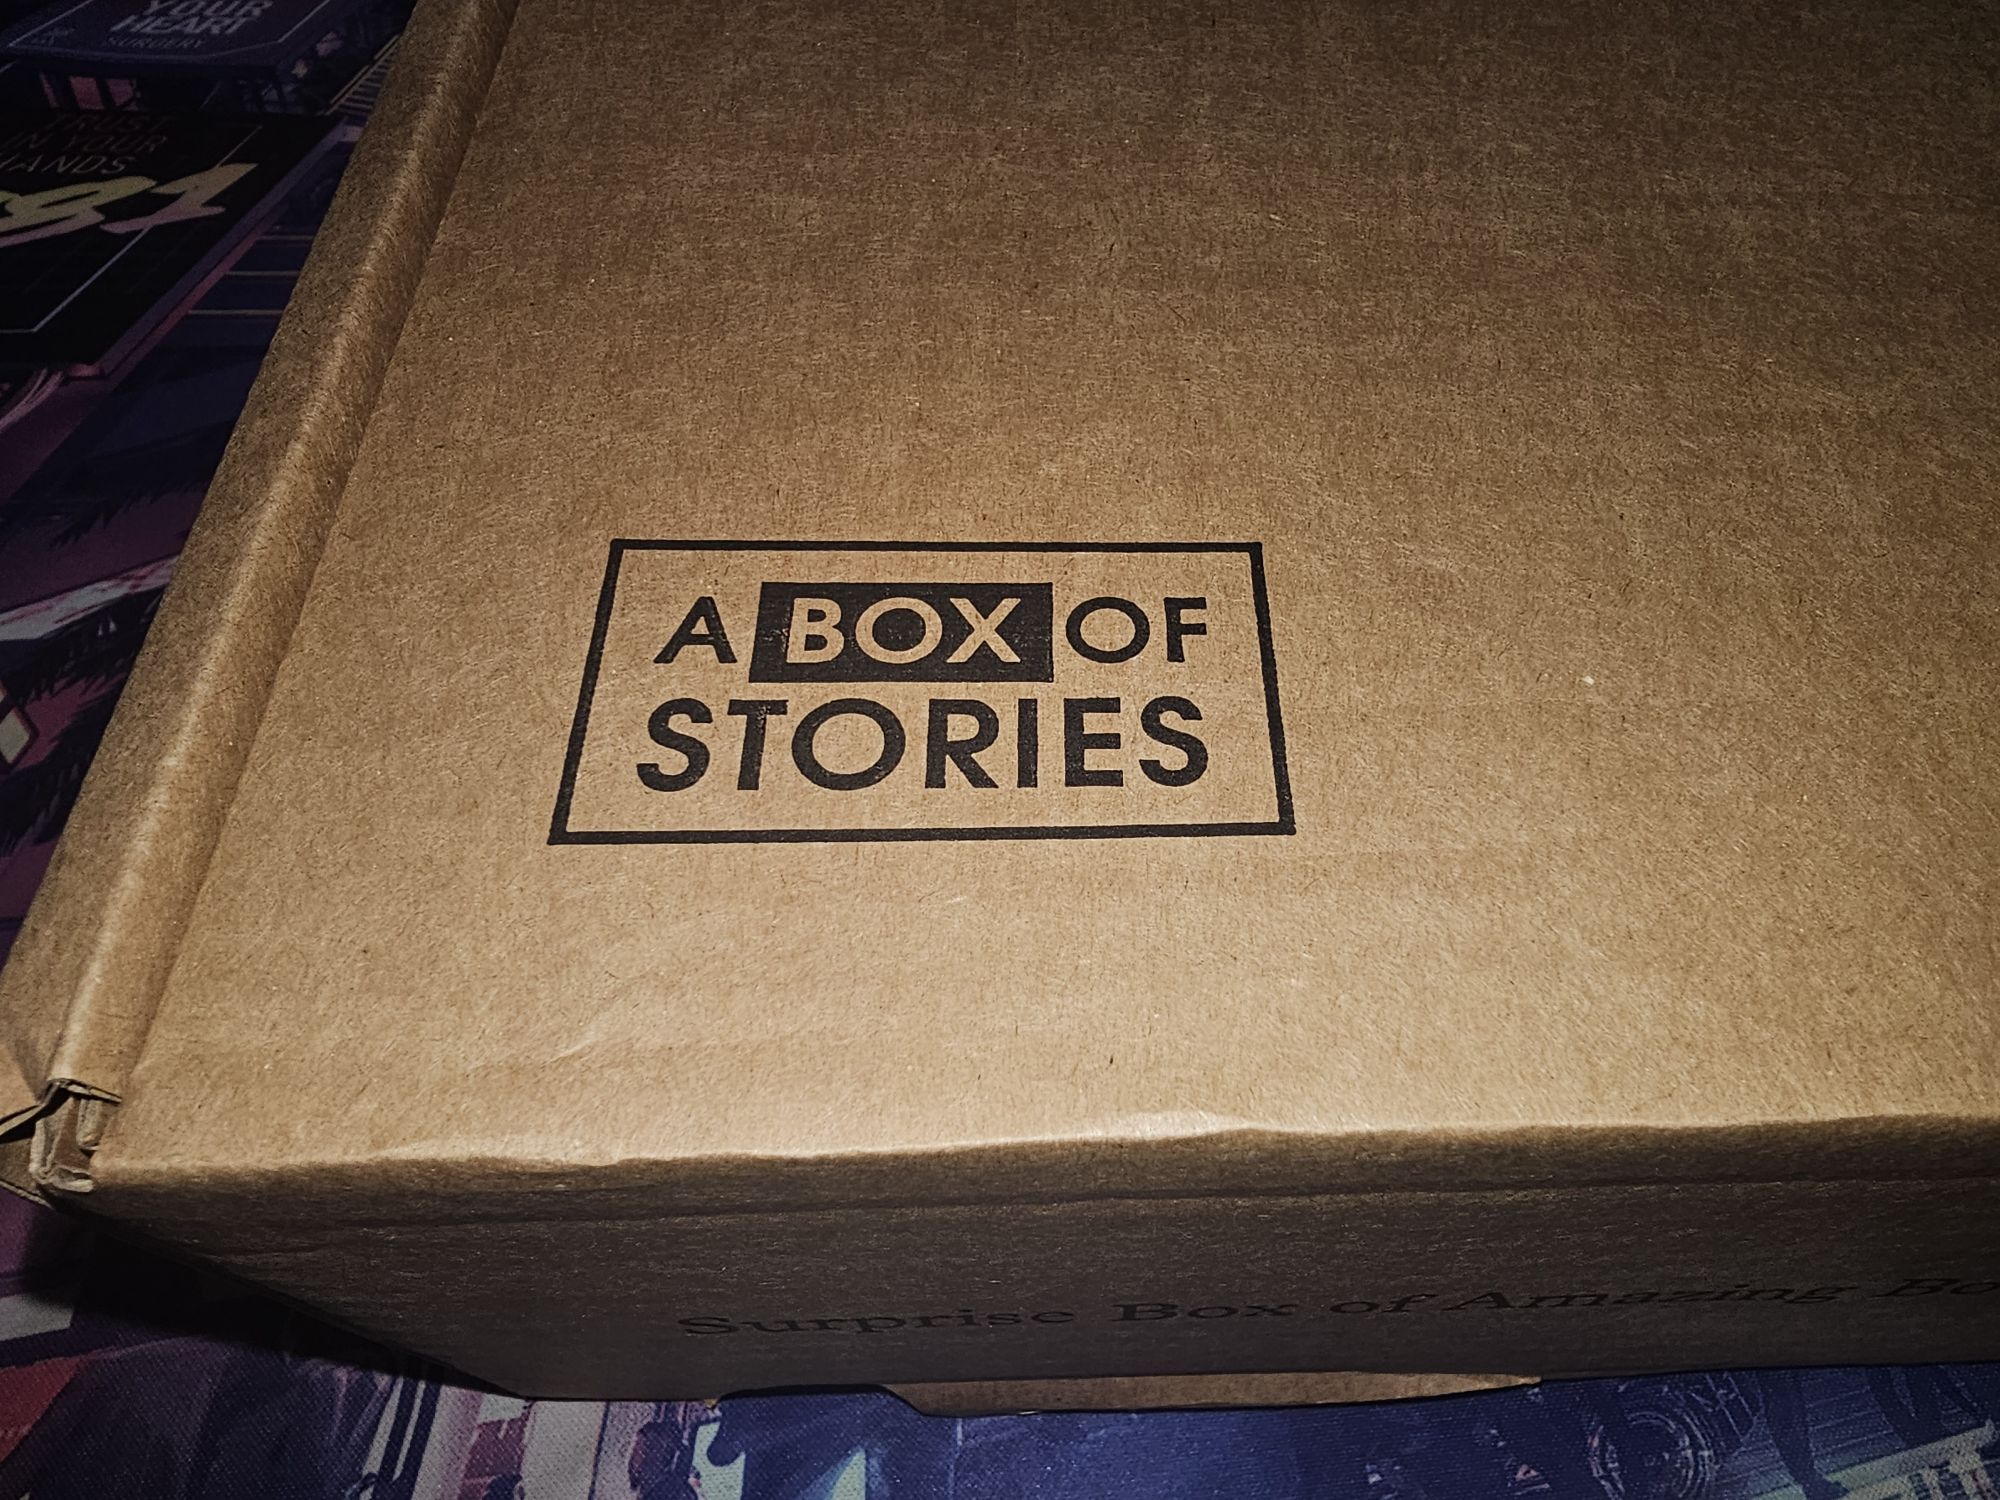 A Box of Stories Subscription Box update